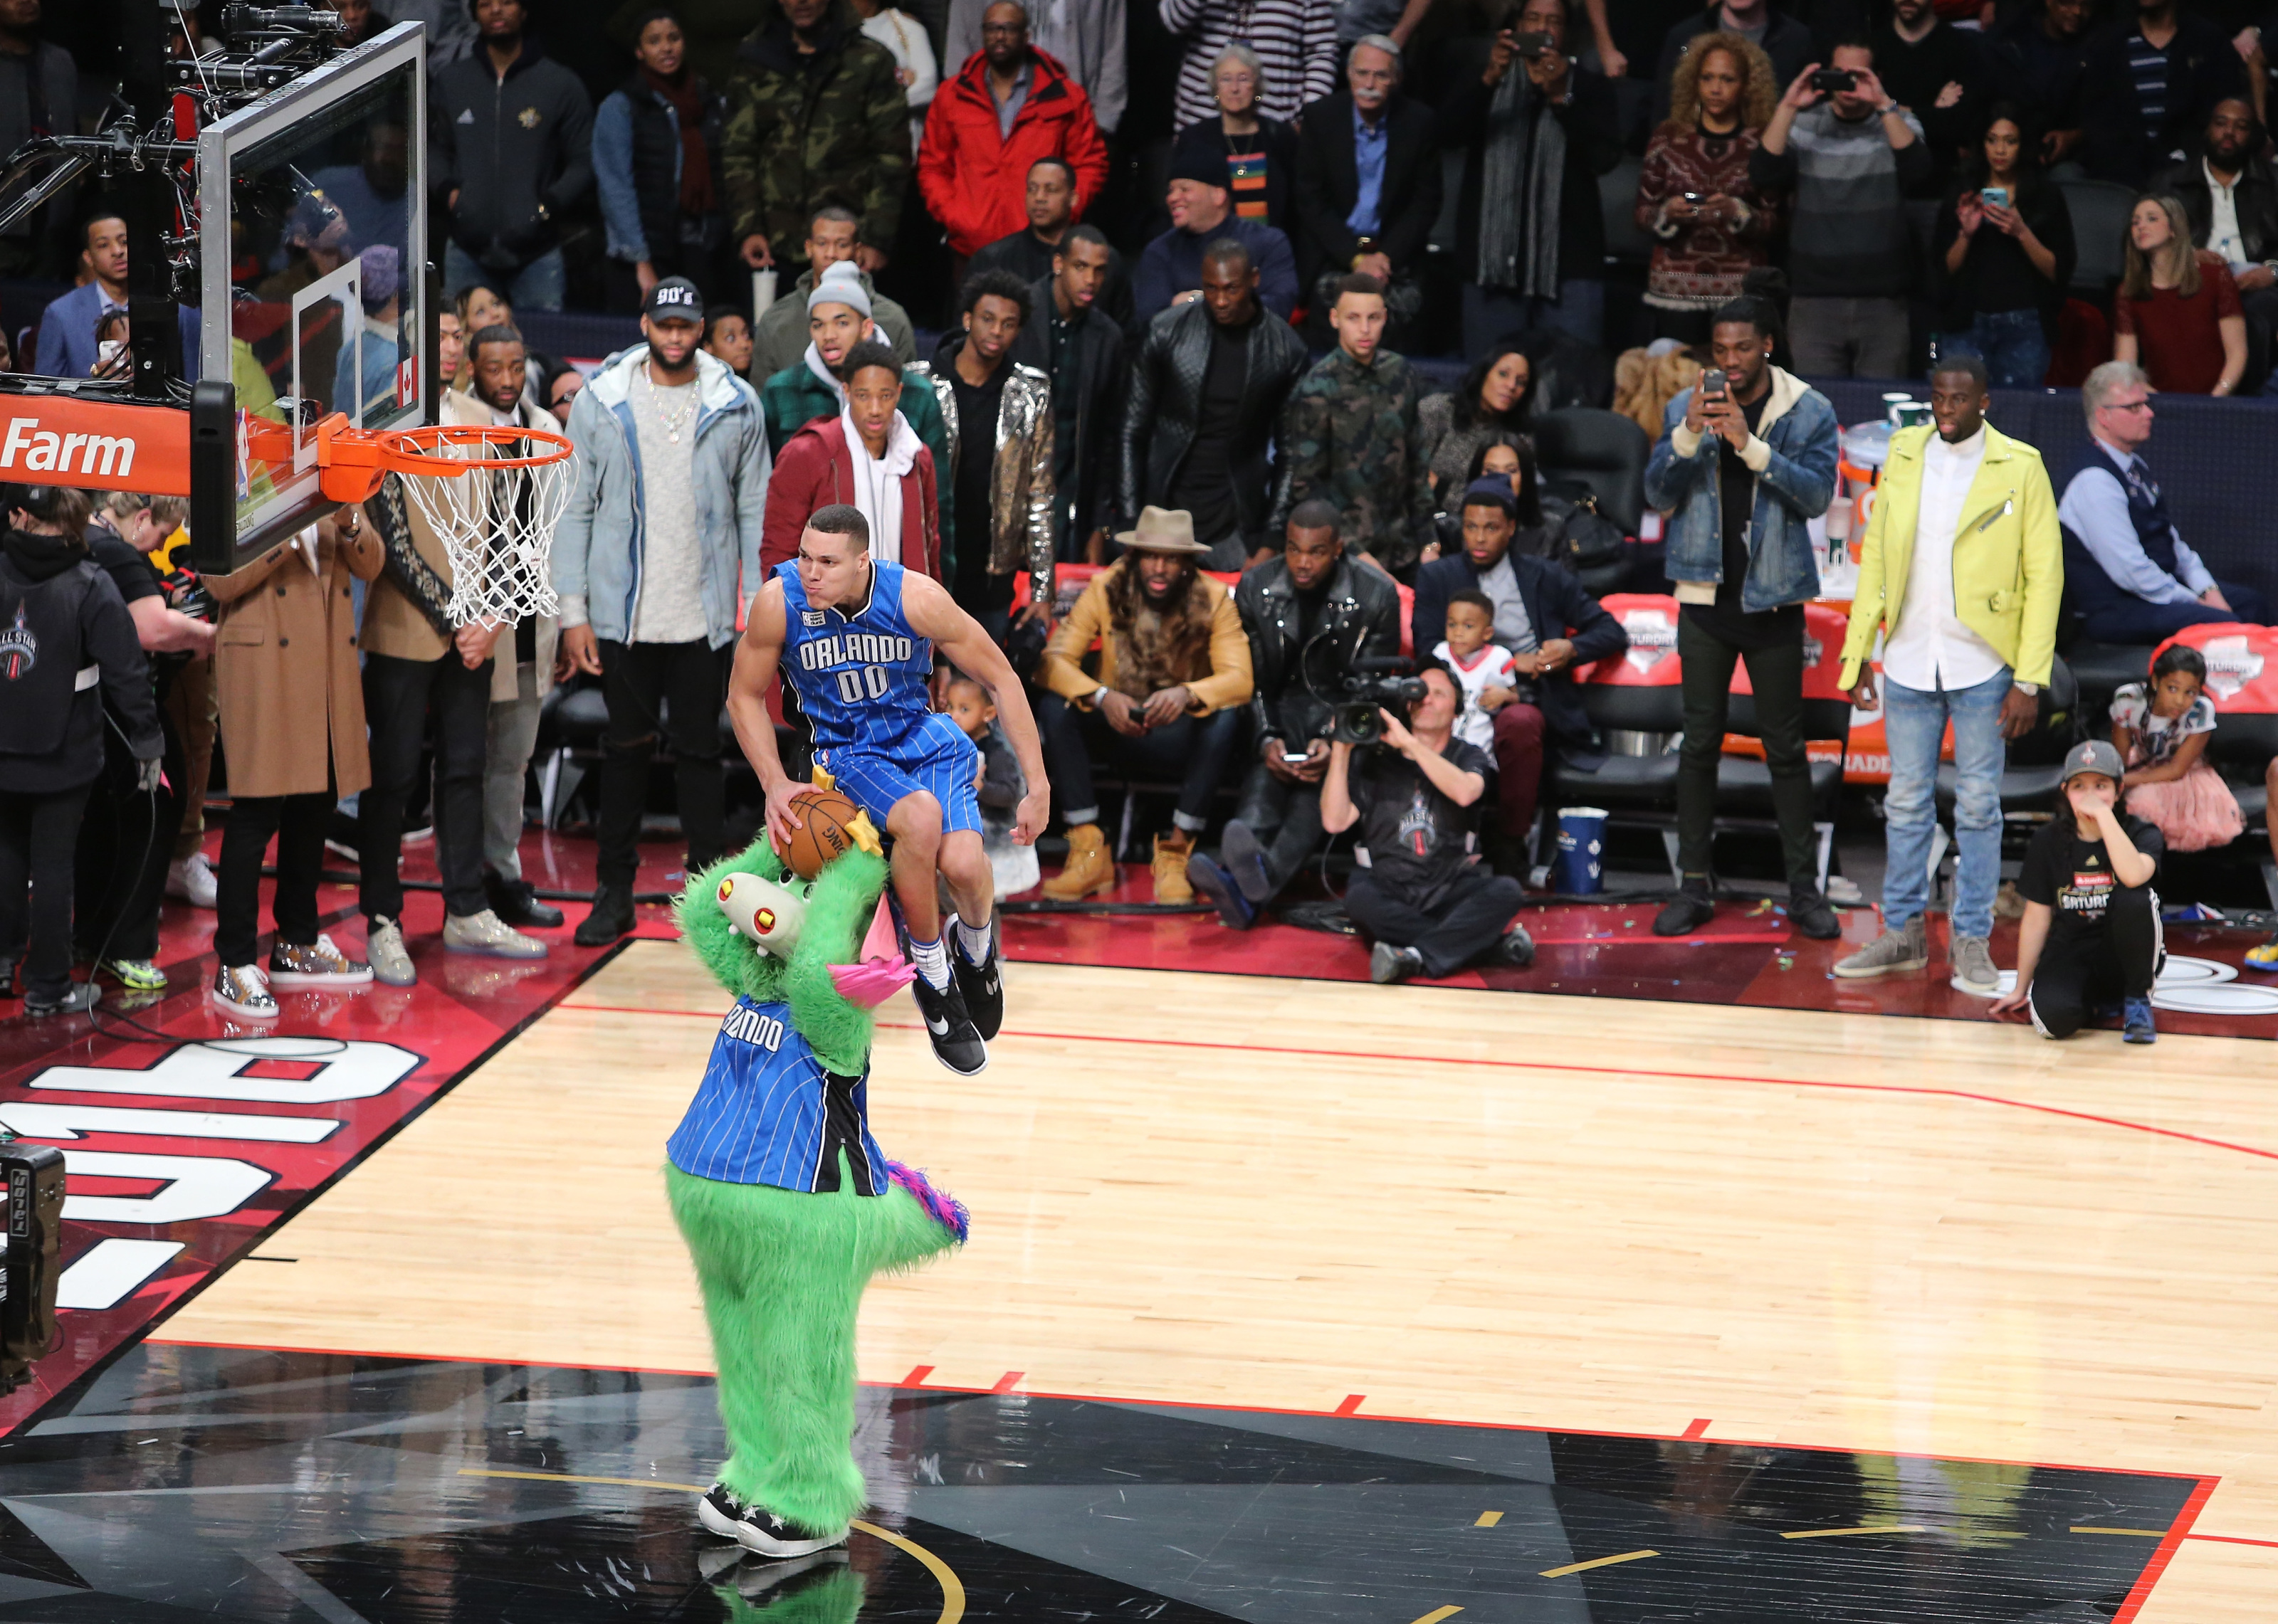 The NBA Dunk Contest officially needs to be retired